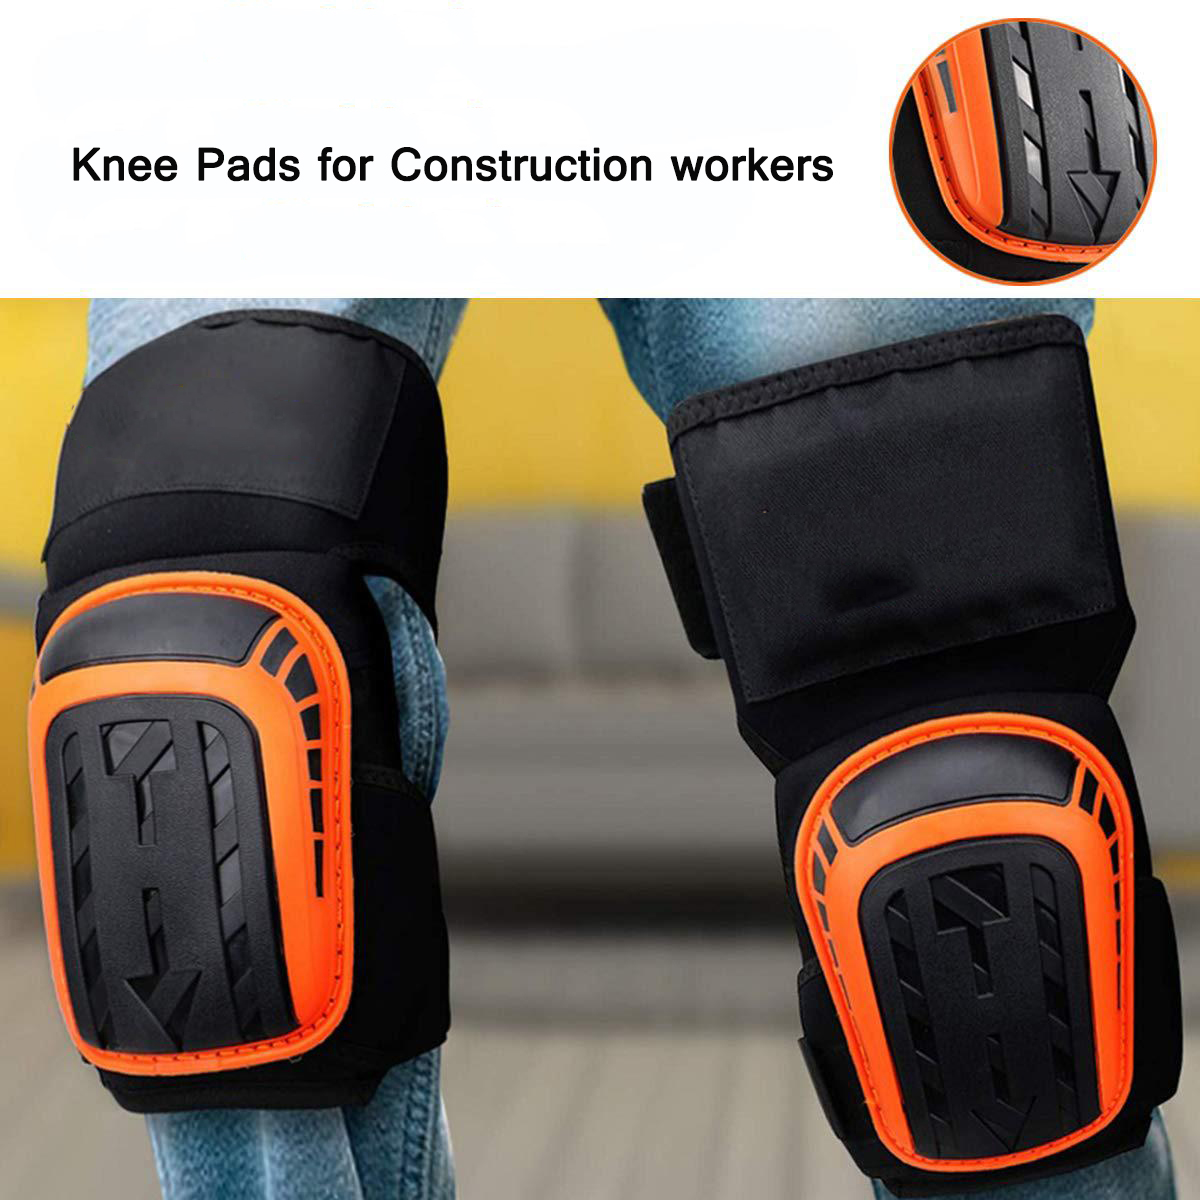 Essential for Knee Protection